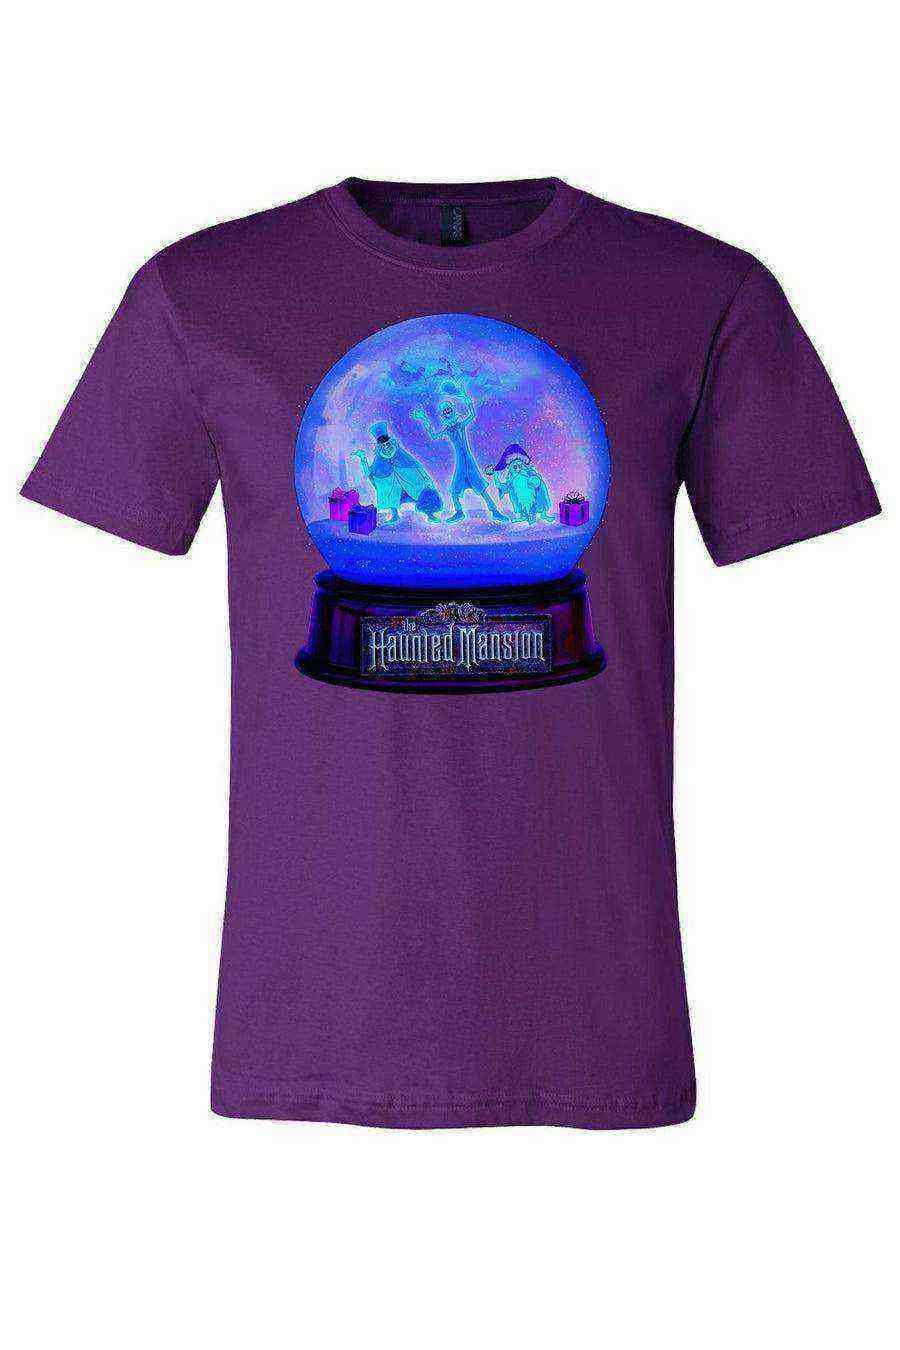 Haunted Mansion Holidays Tee | Hitchhiking Ghosts Tee - Dylan's Tees